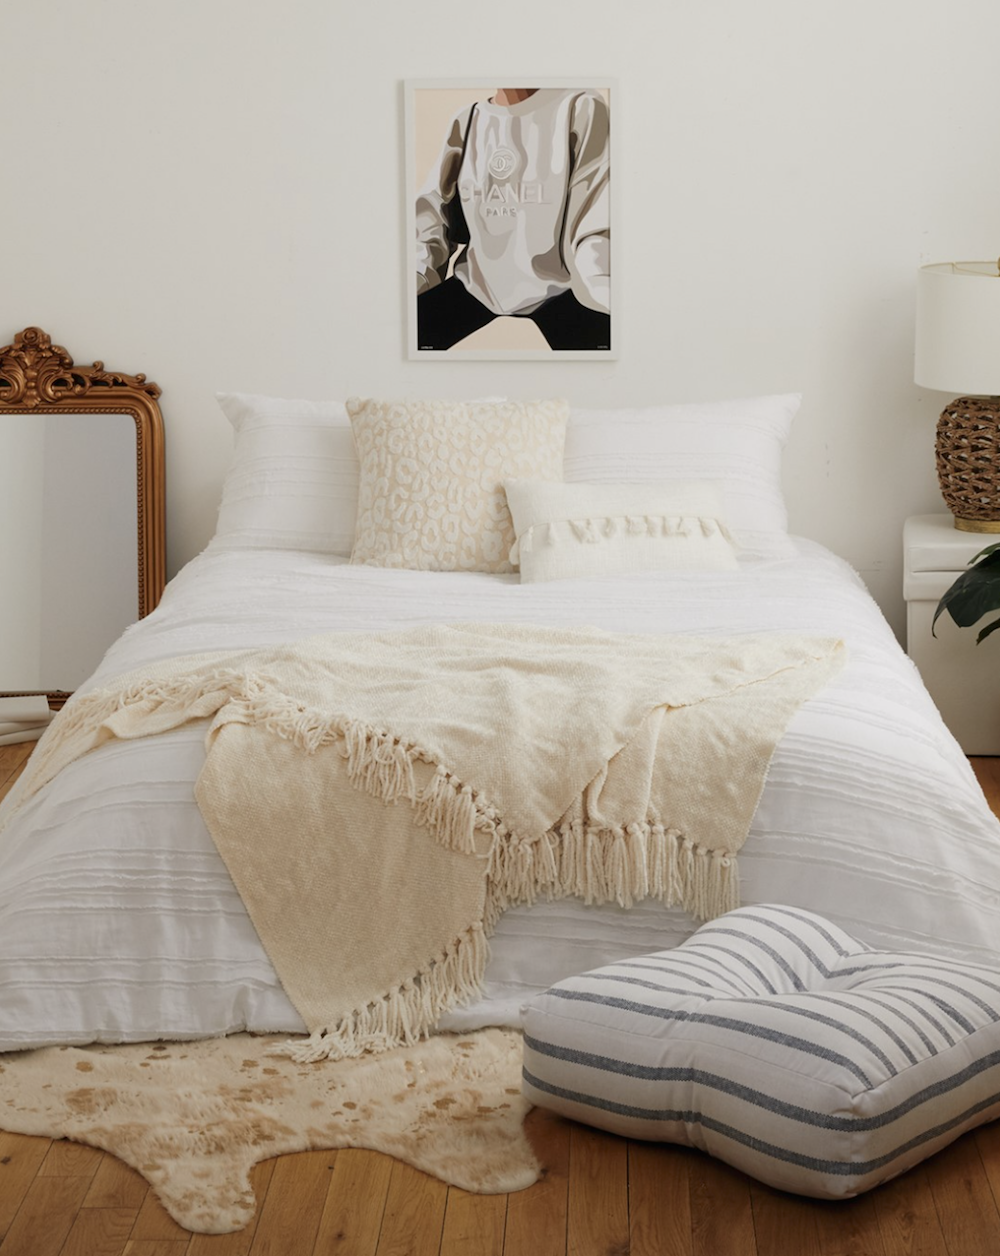 image of a bed with white linens in a white room with boho decor